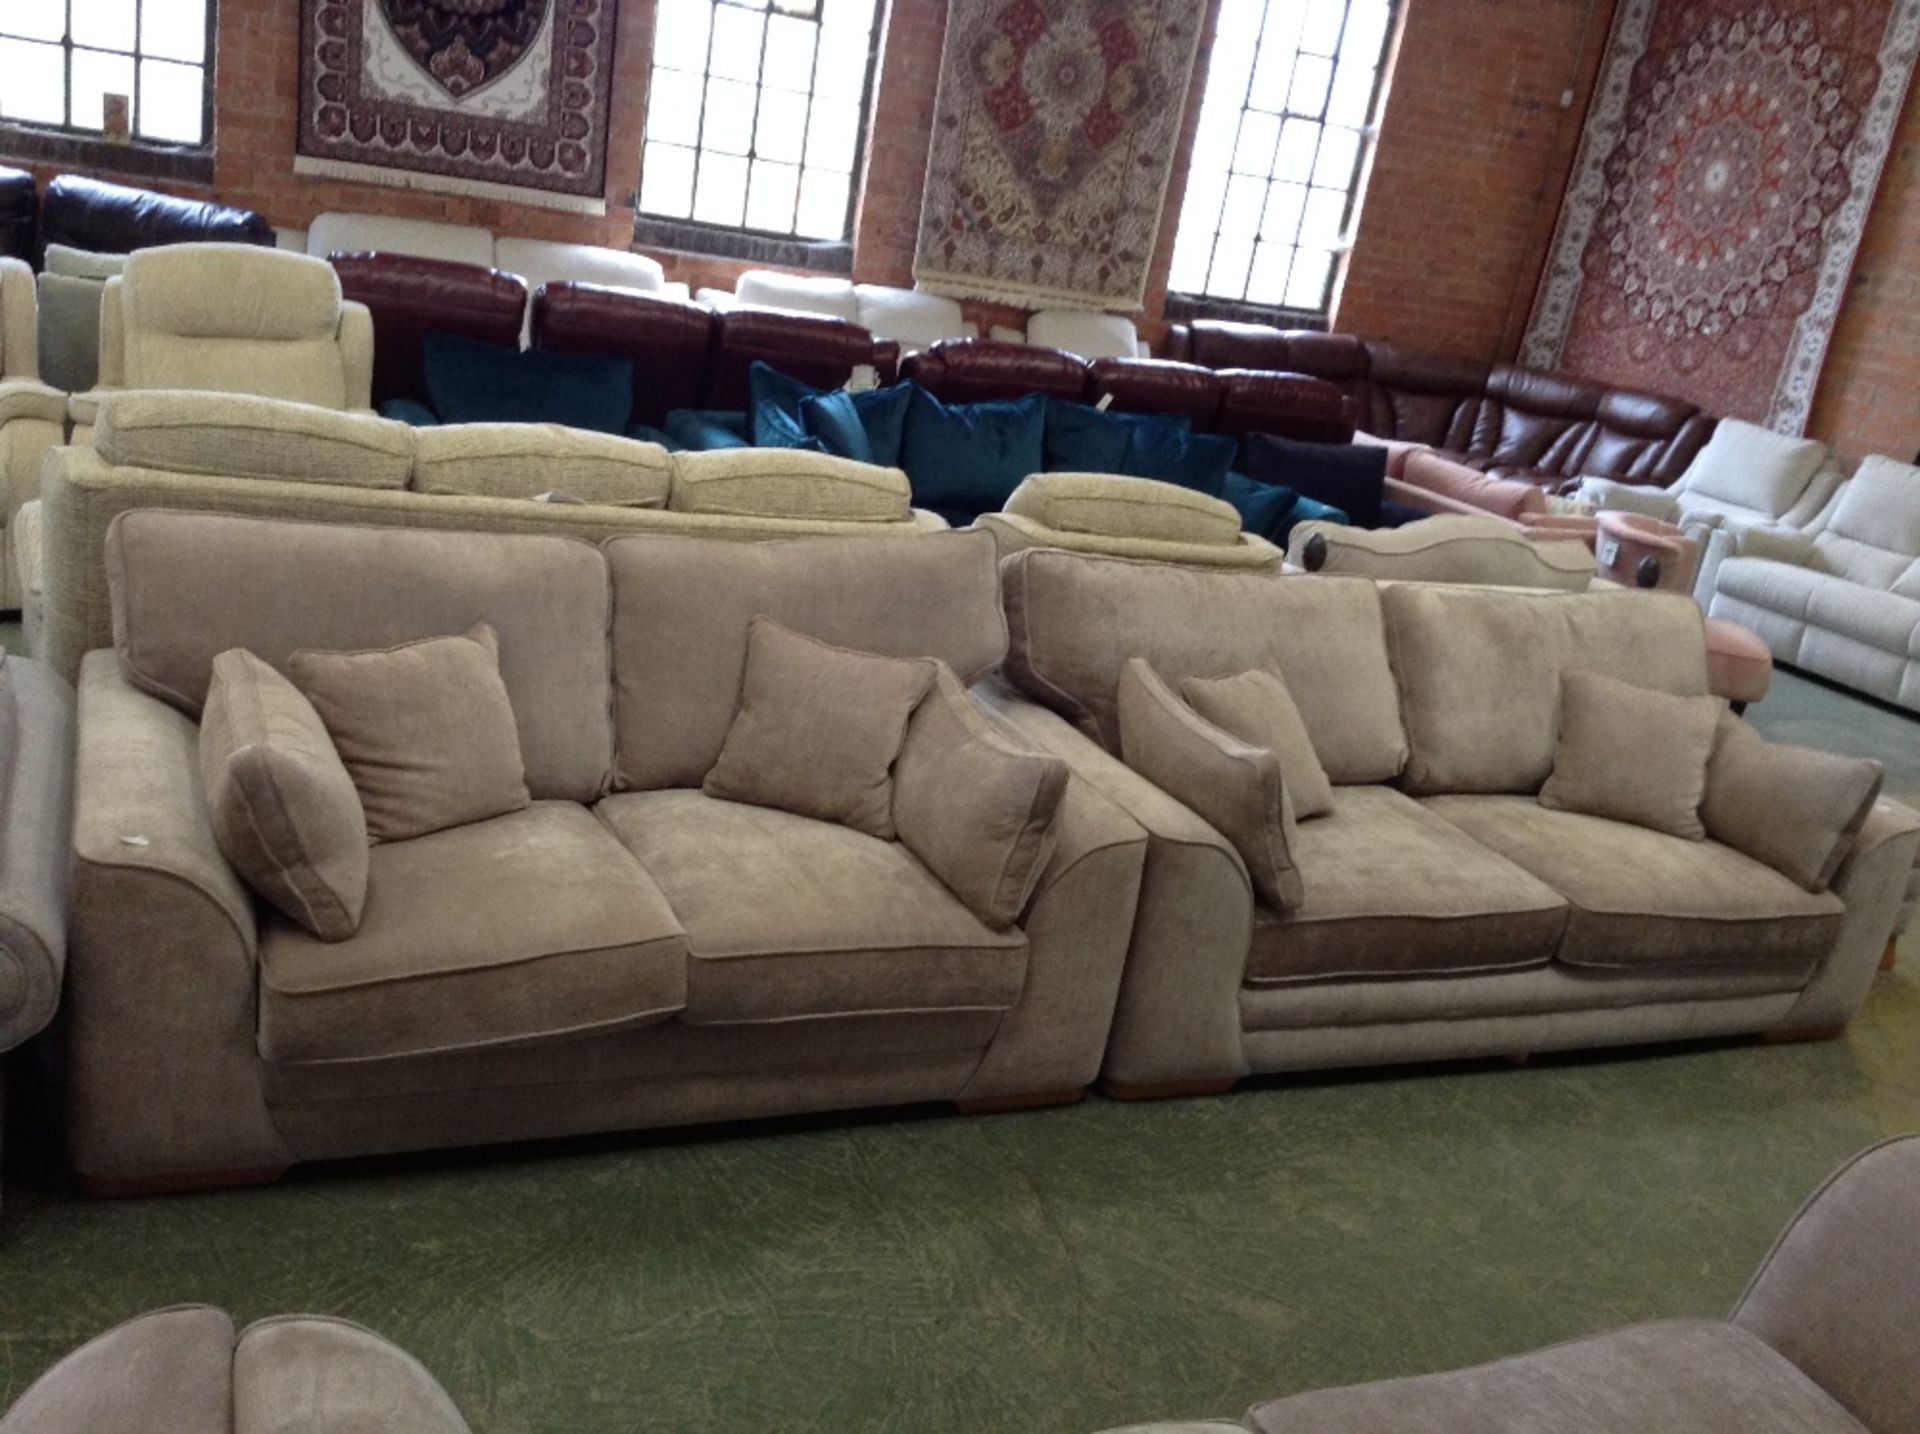 BEIGE 3 SEATER SOFA, 2 SEATER SOFA AND FOOTSTOOL (